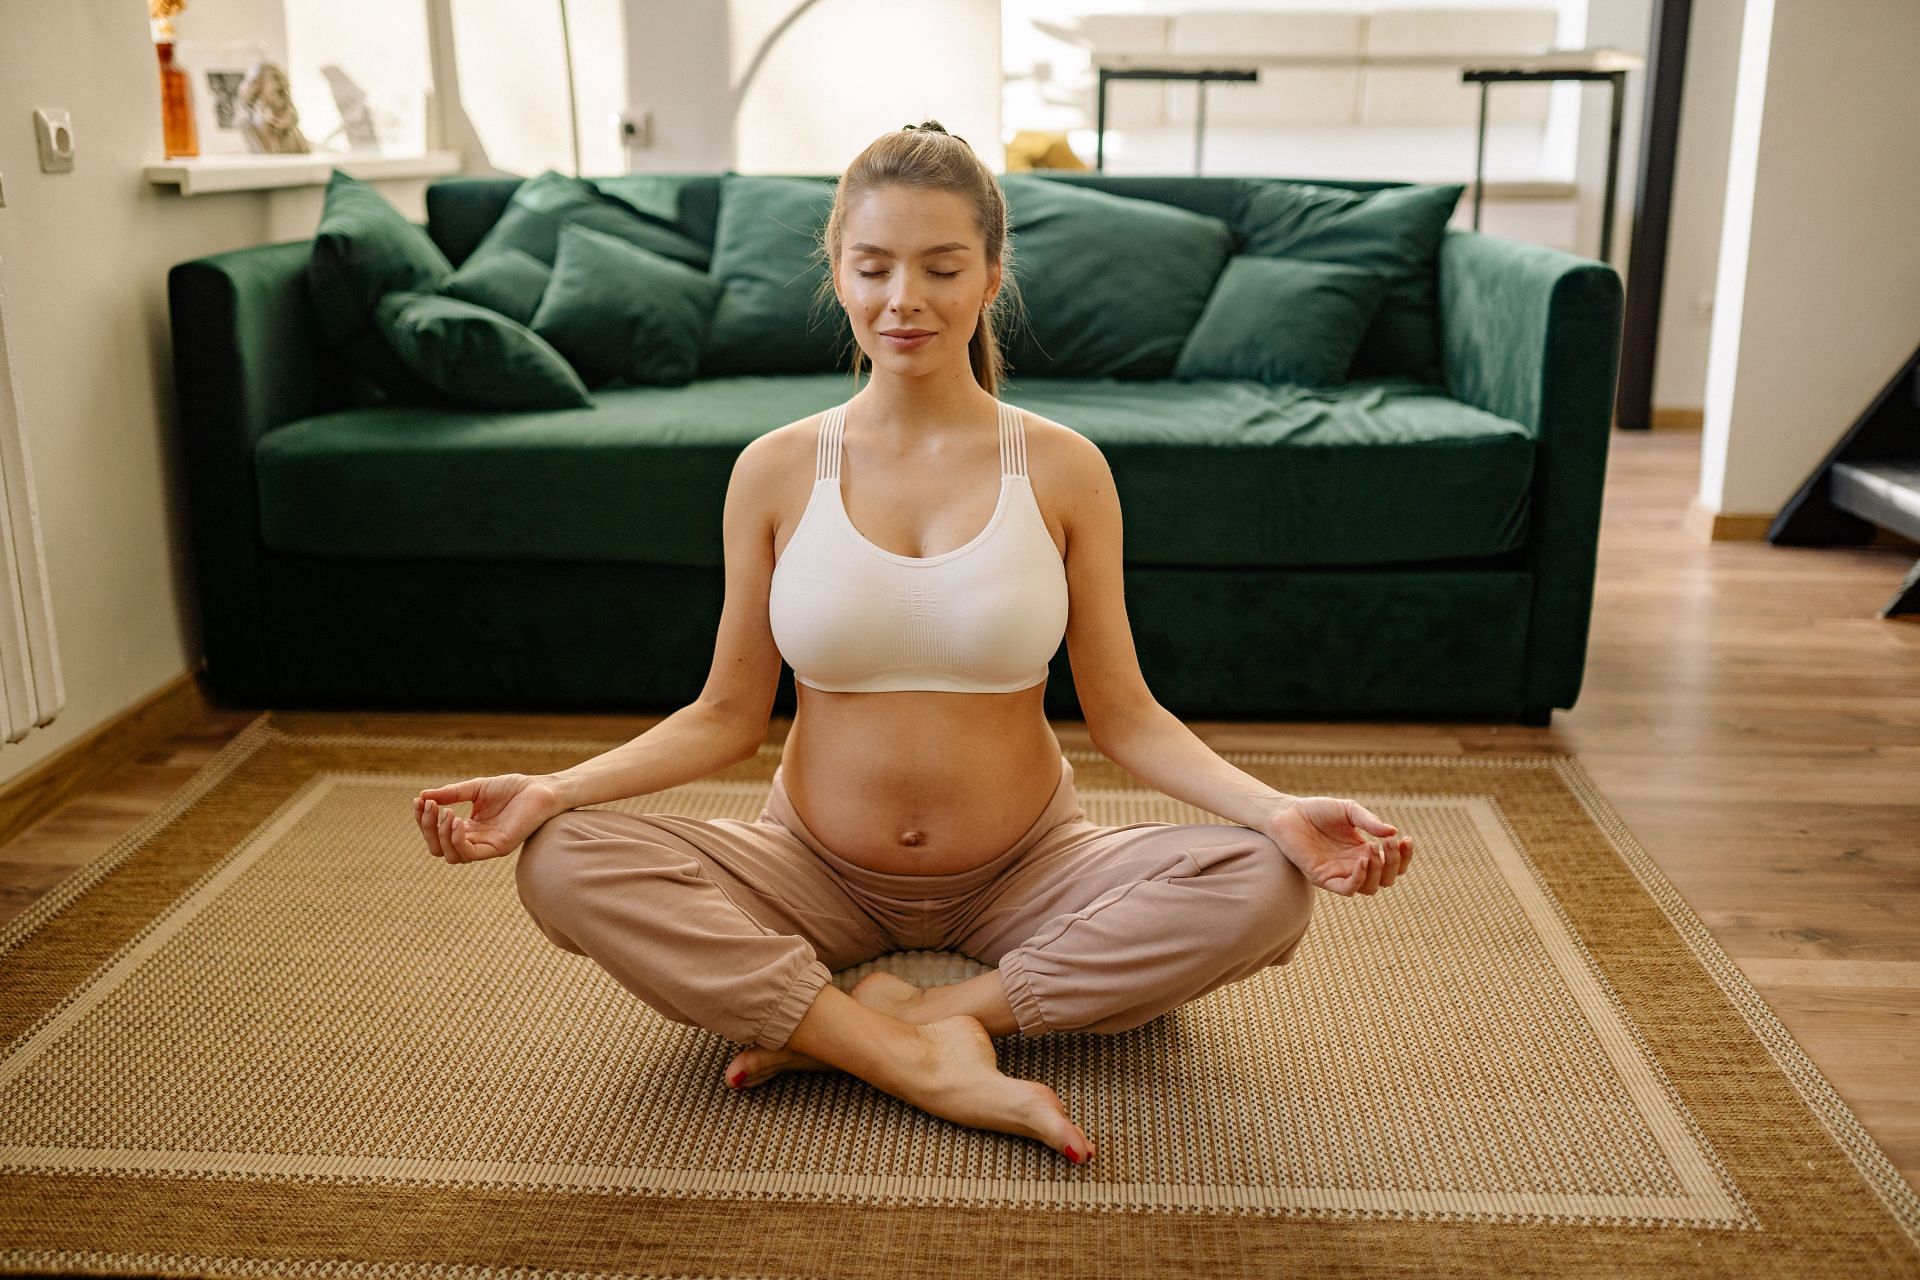 As you gain strength, flexibility, and balance via prenatal yoga poses, you have the ability to reconnect with your body. (Image via Unsplash/Yan Krukov)